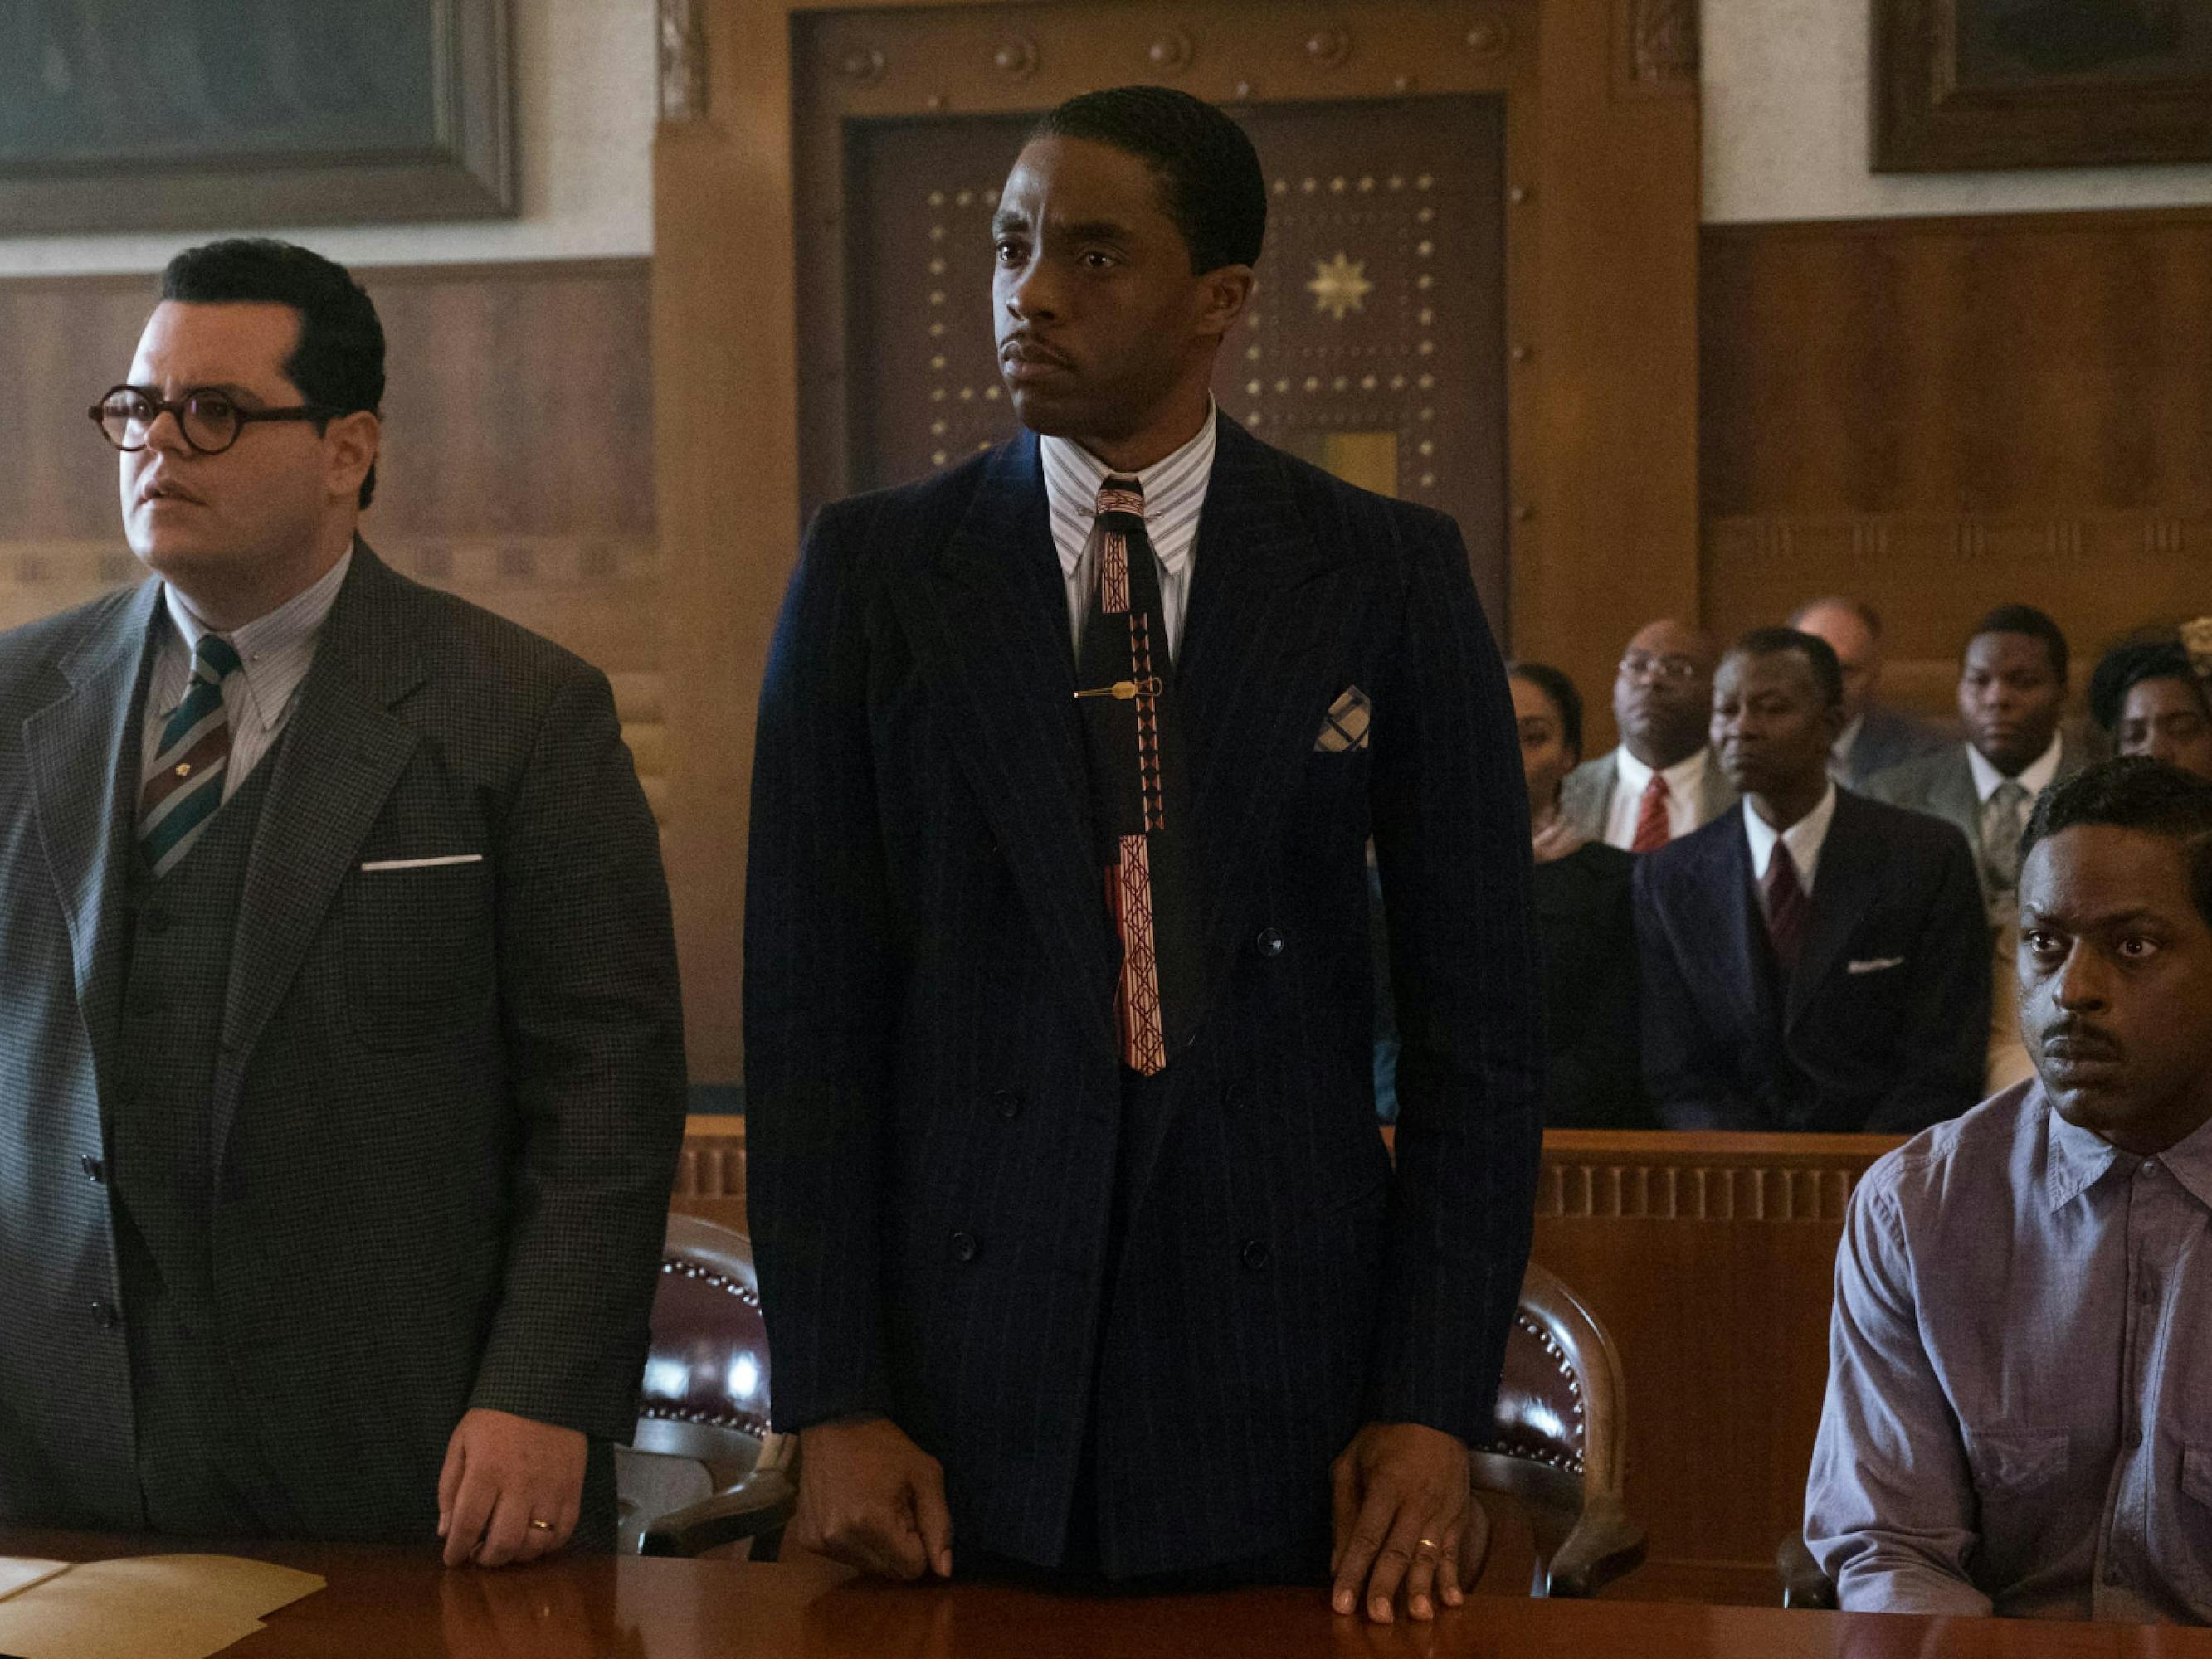 Boseman as Thurgood Marshall. He wears a navy suit and stands between two other men, one in a purple shirt and one in a grey suit. He stands in a courtroom filled with many people and looks off camera with a serious expression.